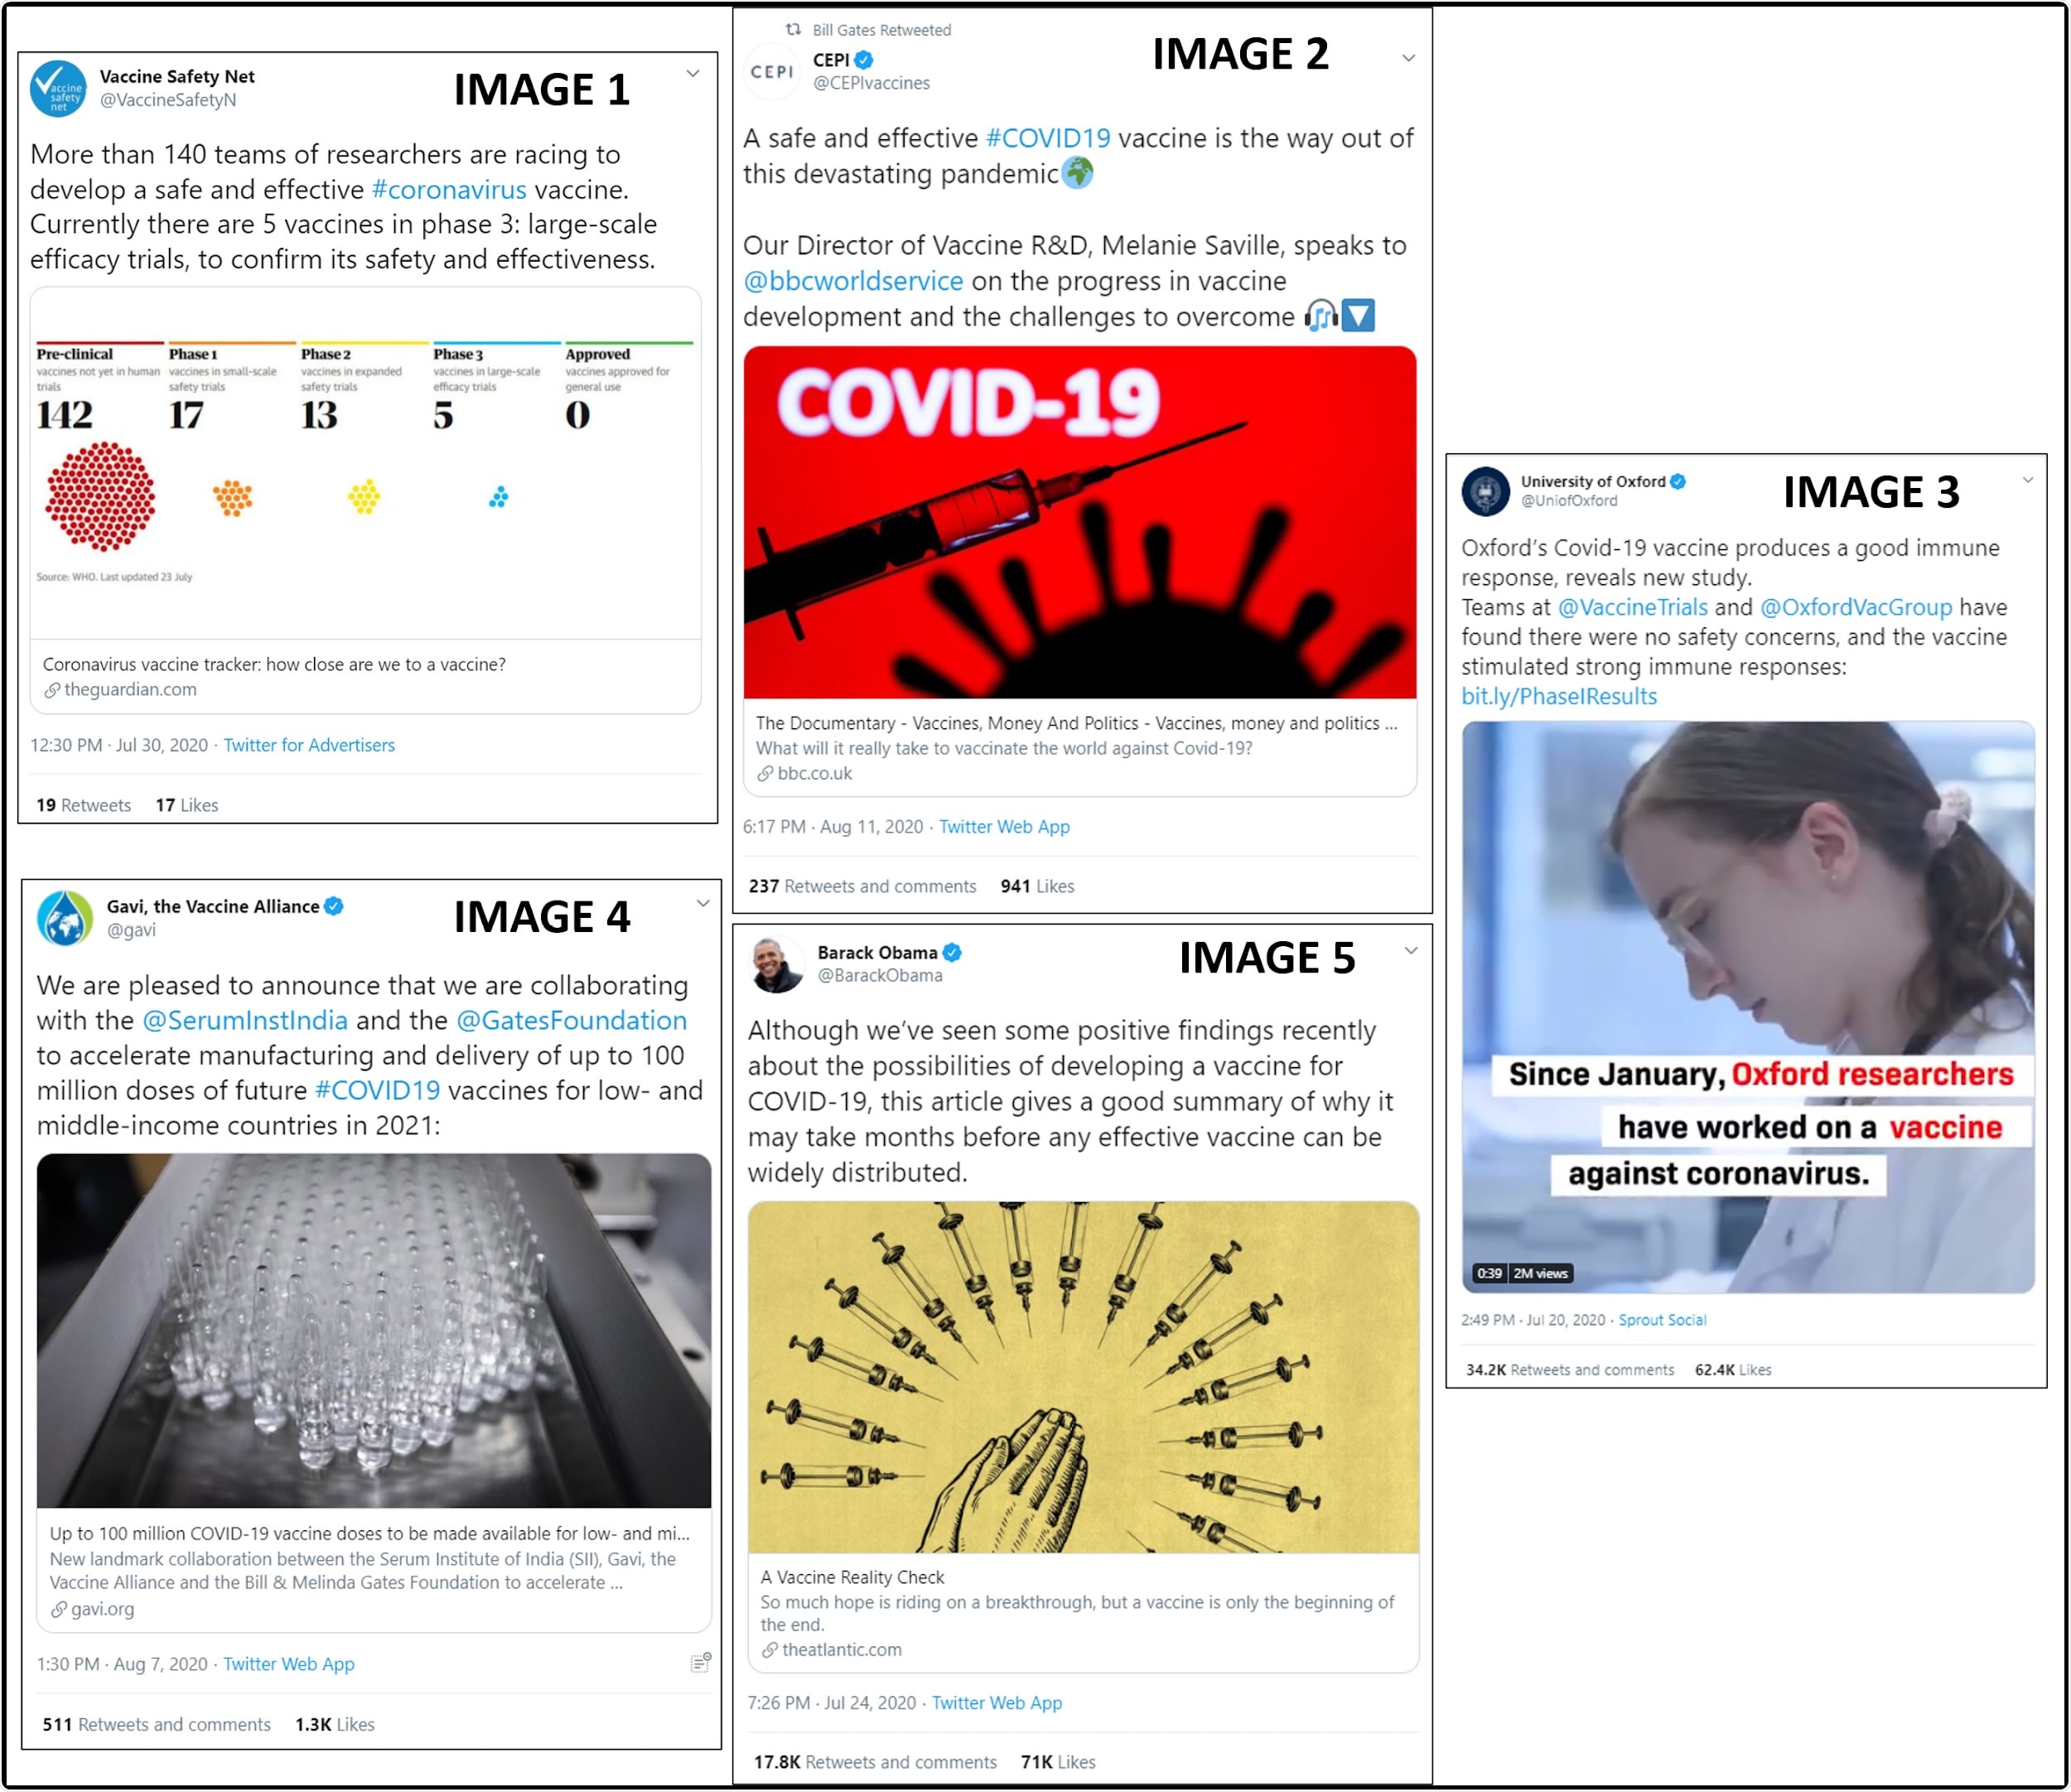 Widely circulating factual information on social media surrounding a COVID-19 vaccine between June and August 2020. The same five images were selected (see Methods) for exposure to respondents in the UK and US. These “control” image sets were shown to 1,000 respondents in the UK and the US.